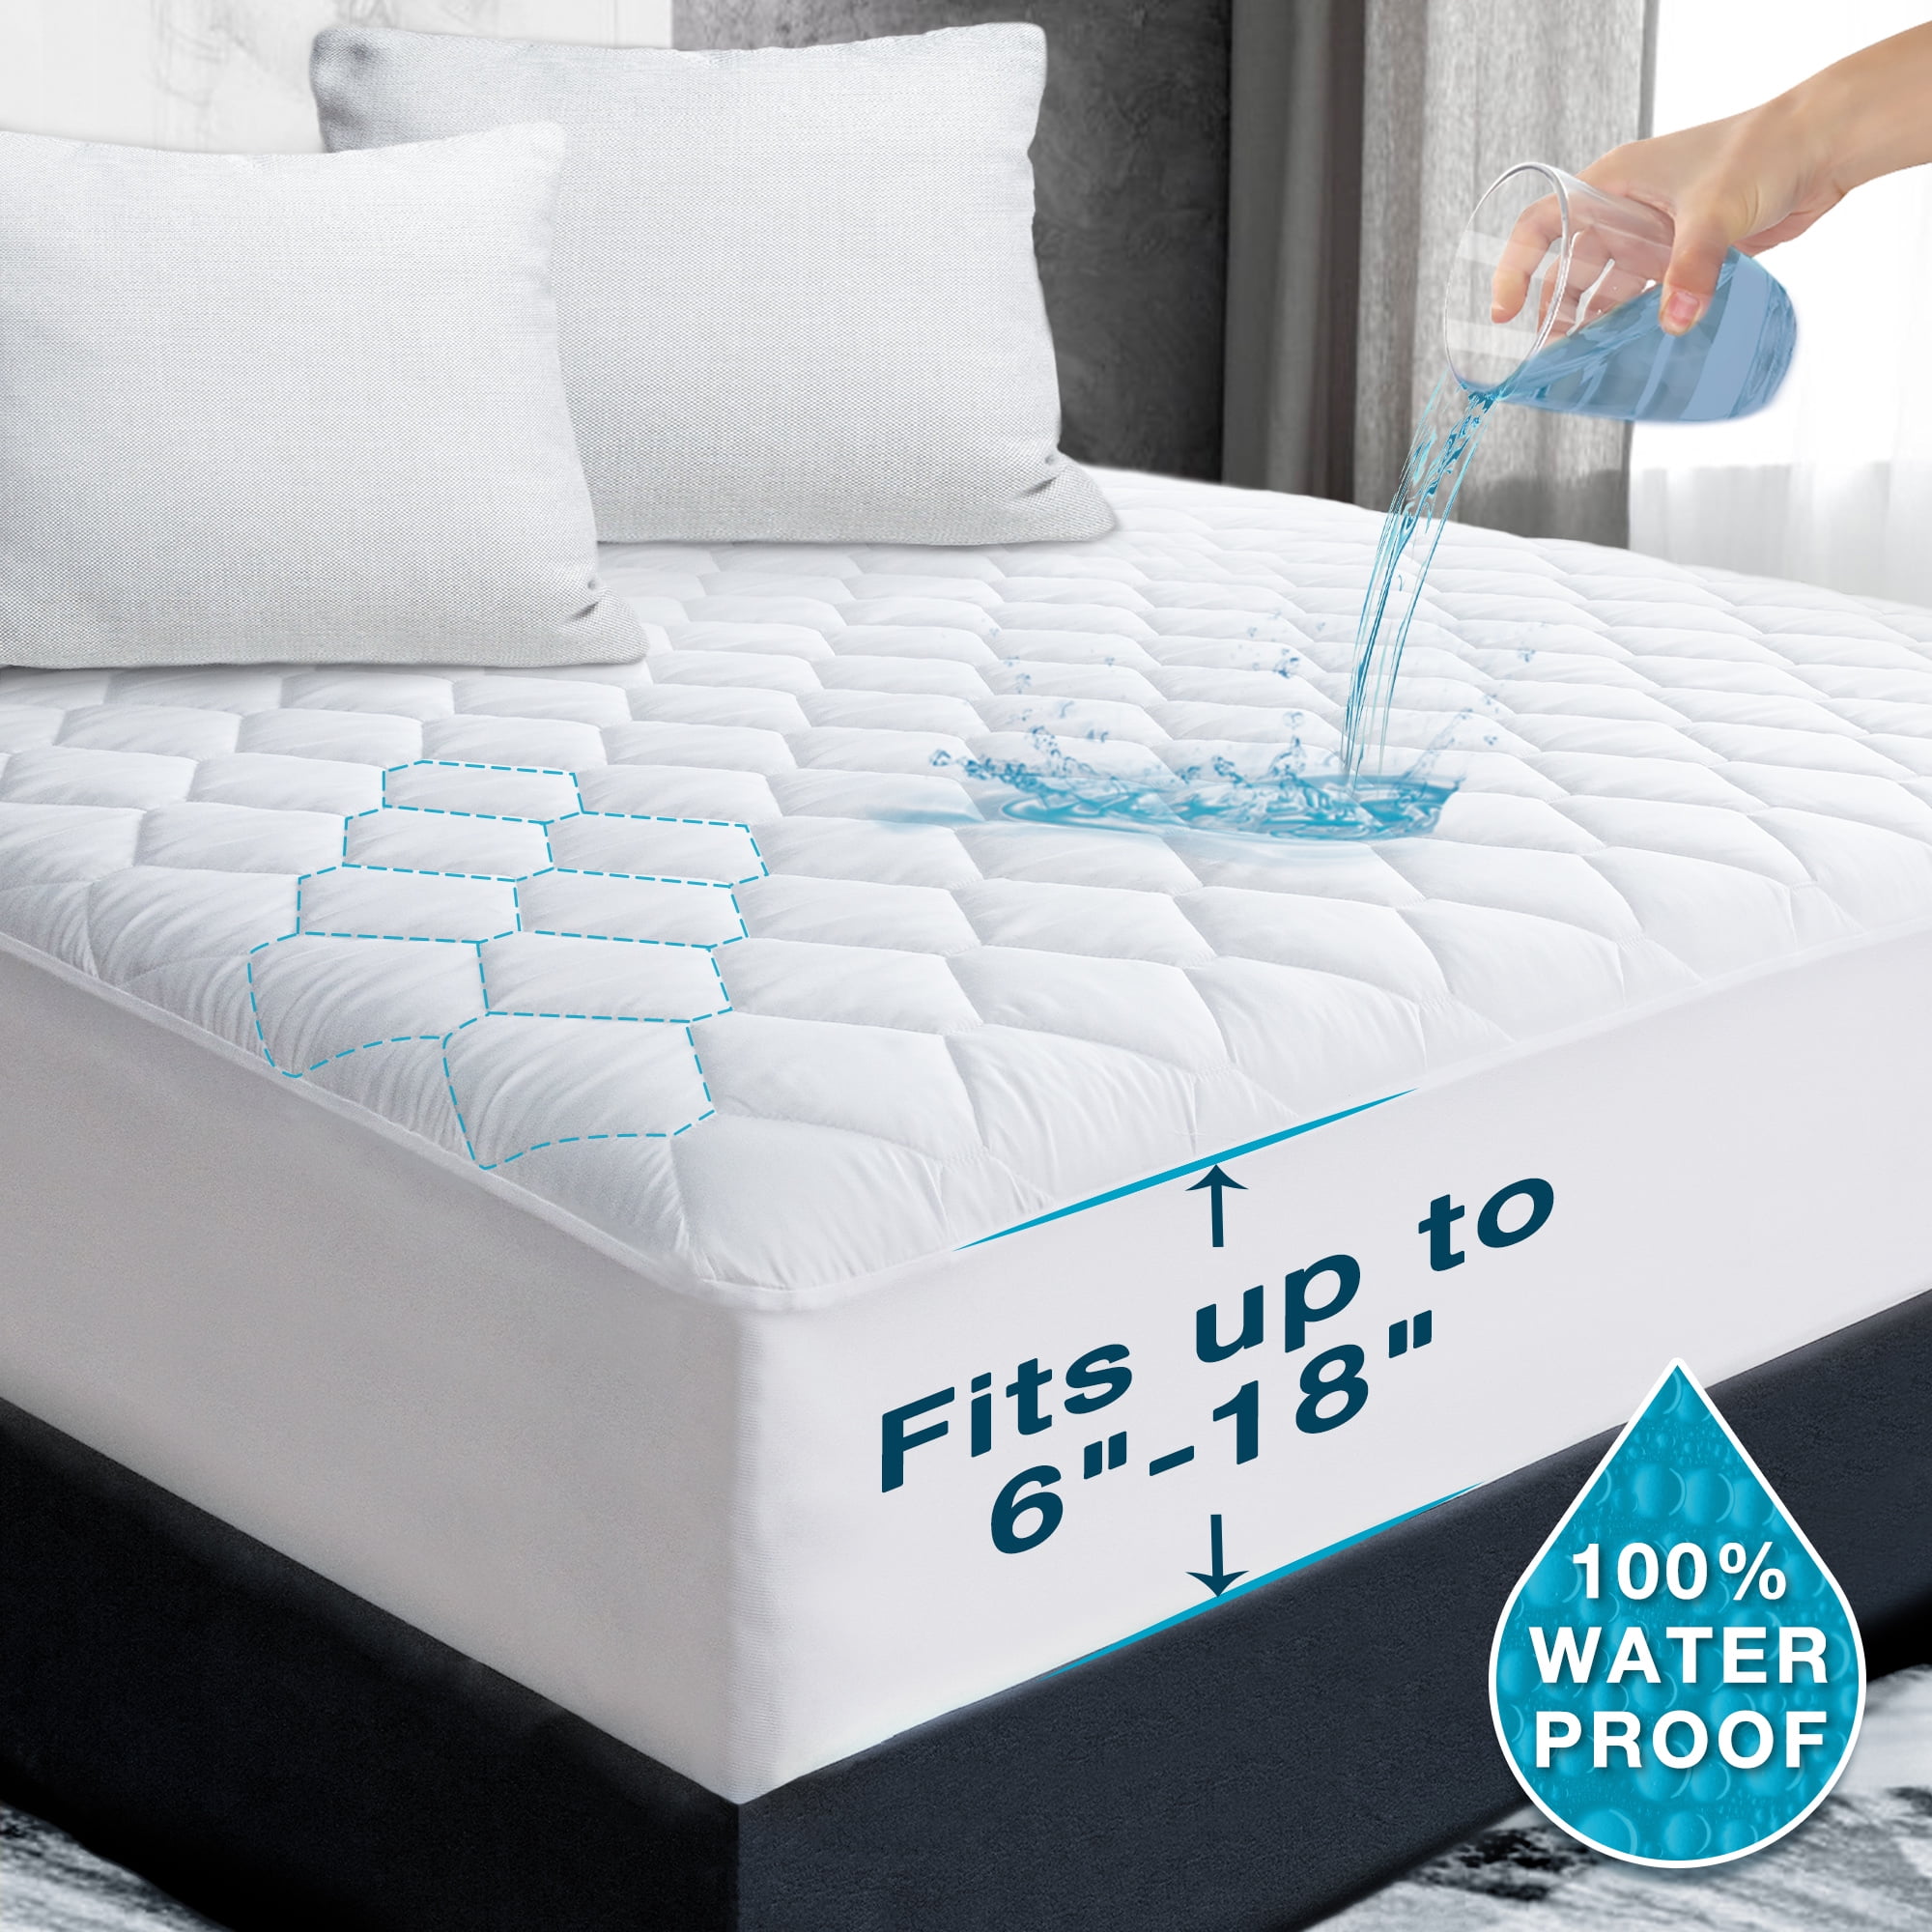 Details about   Waterproof Mattress Protector Queen Size Mattress Pad Cover Fitted 18inch Pocket